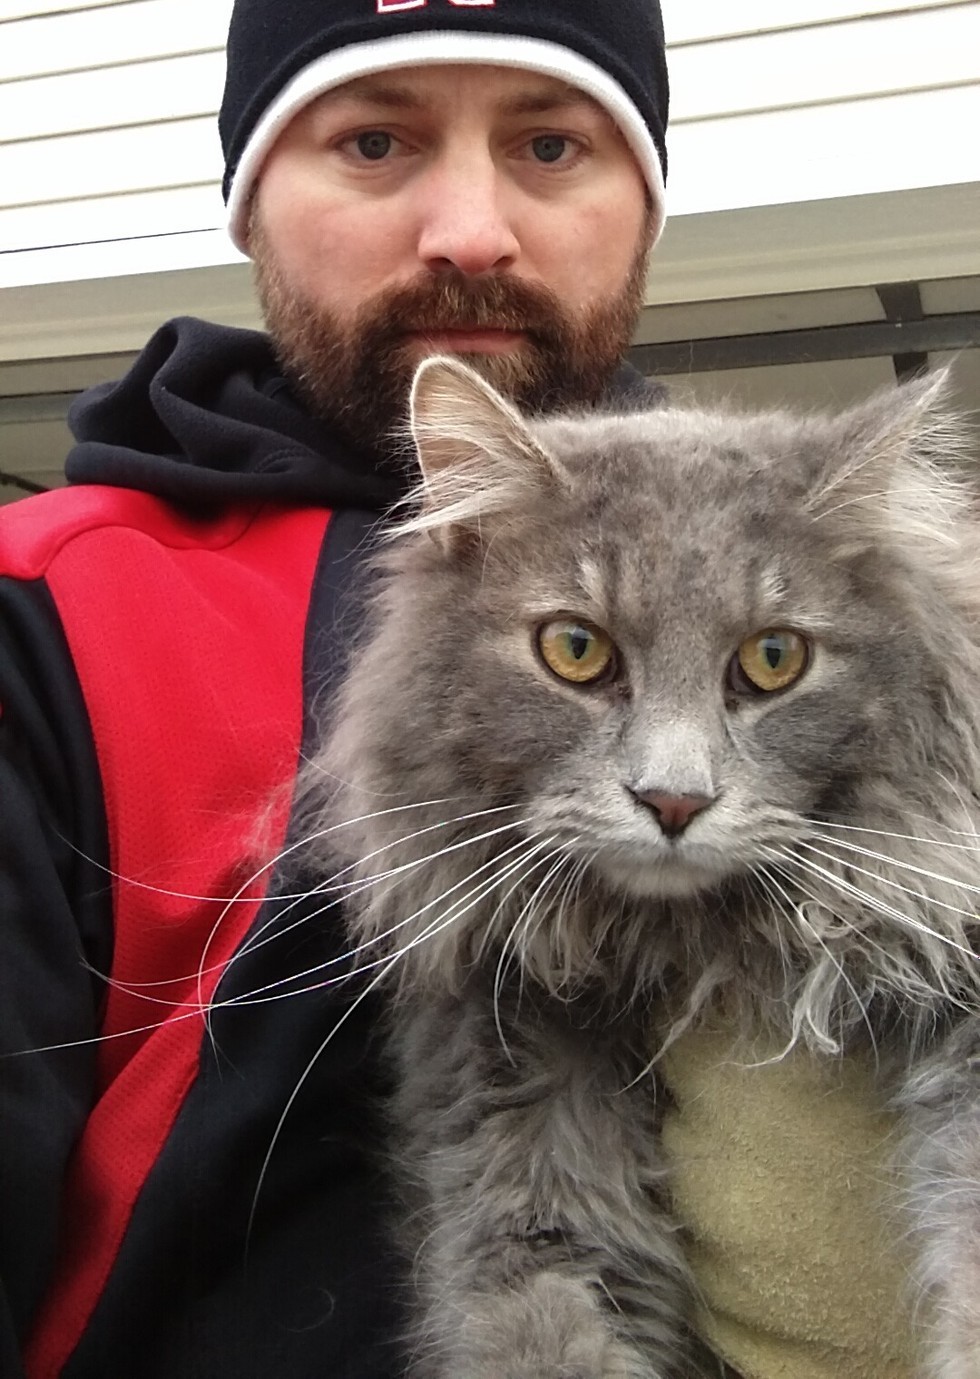 man saves cat from his car reunites him with family